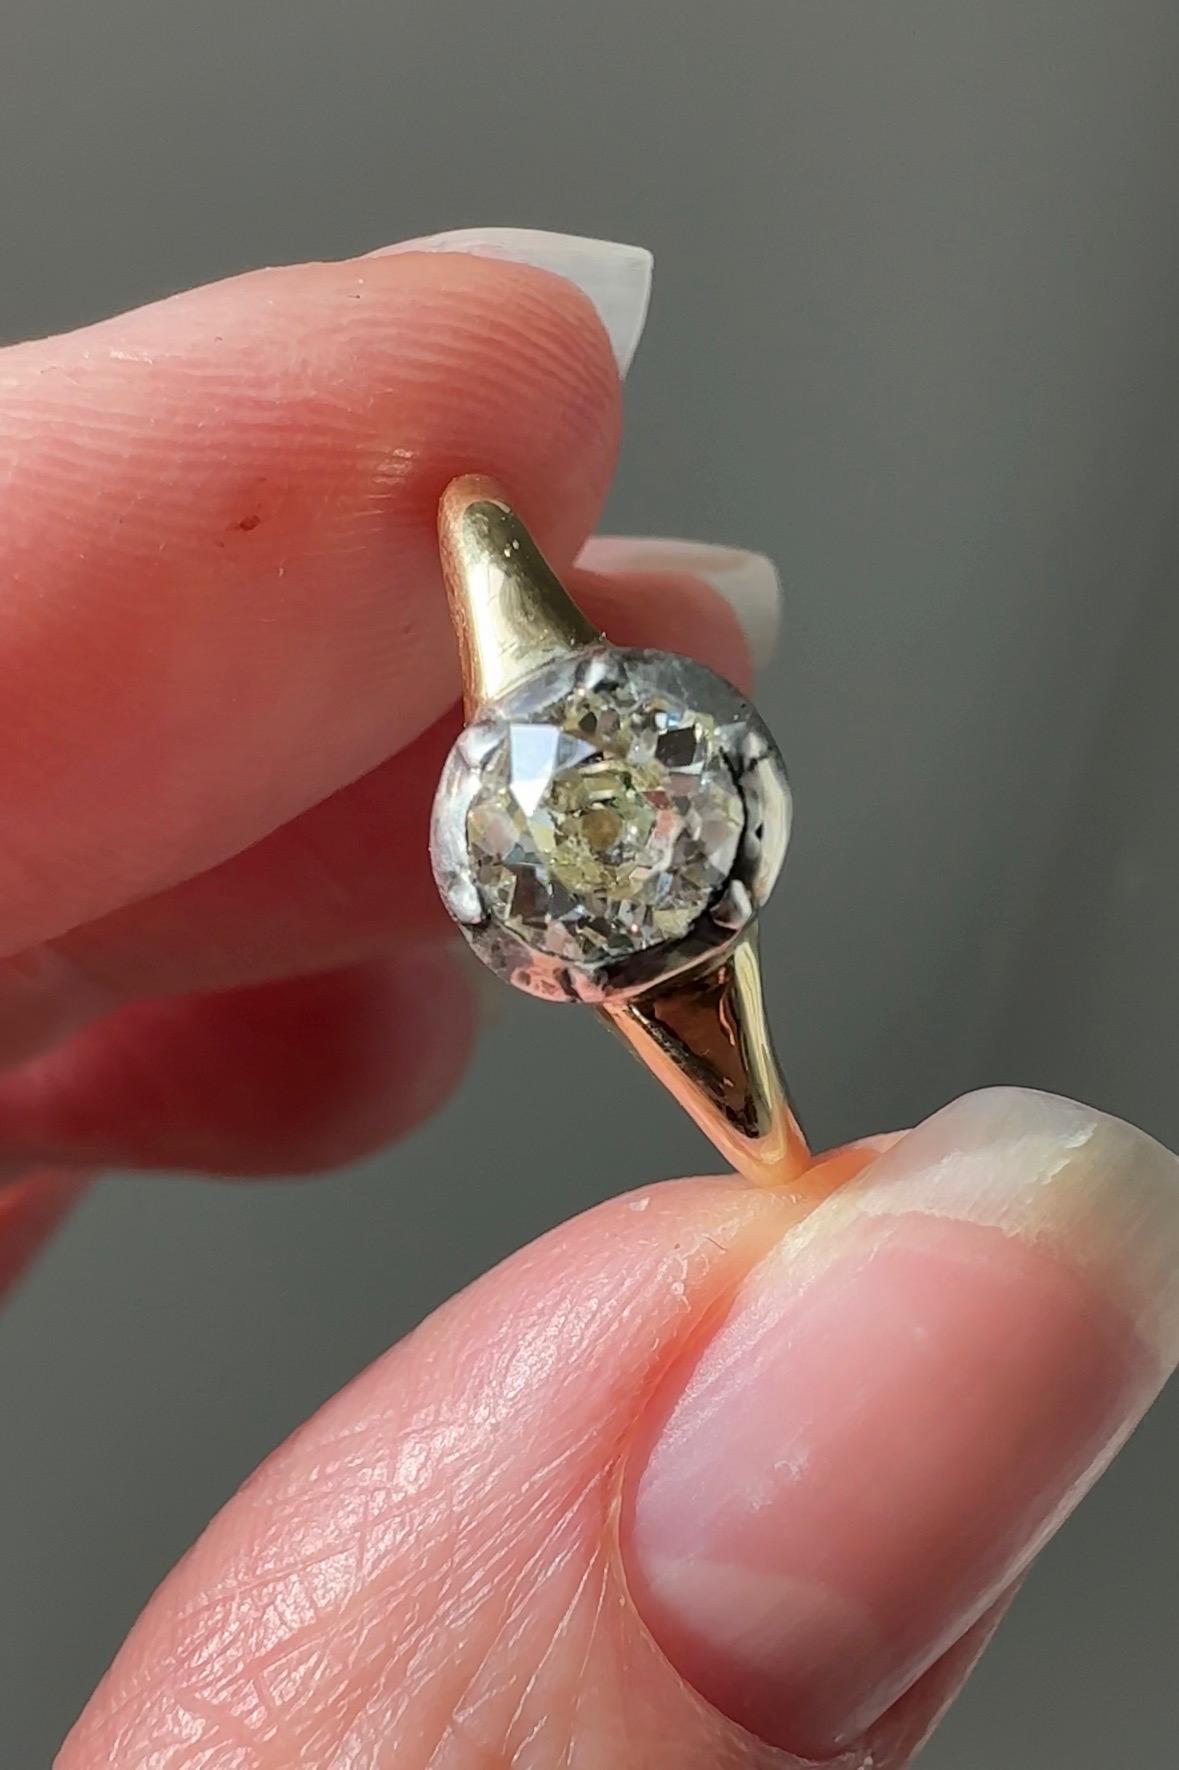 This lovely ring is a living relic from the Georgian period in England. True to form, this ring is made using 15k gold and features a lovely old mine cut diamond which has been hand cut by lapidaries during this period. Another noteworthy feature is